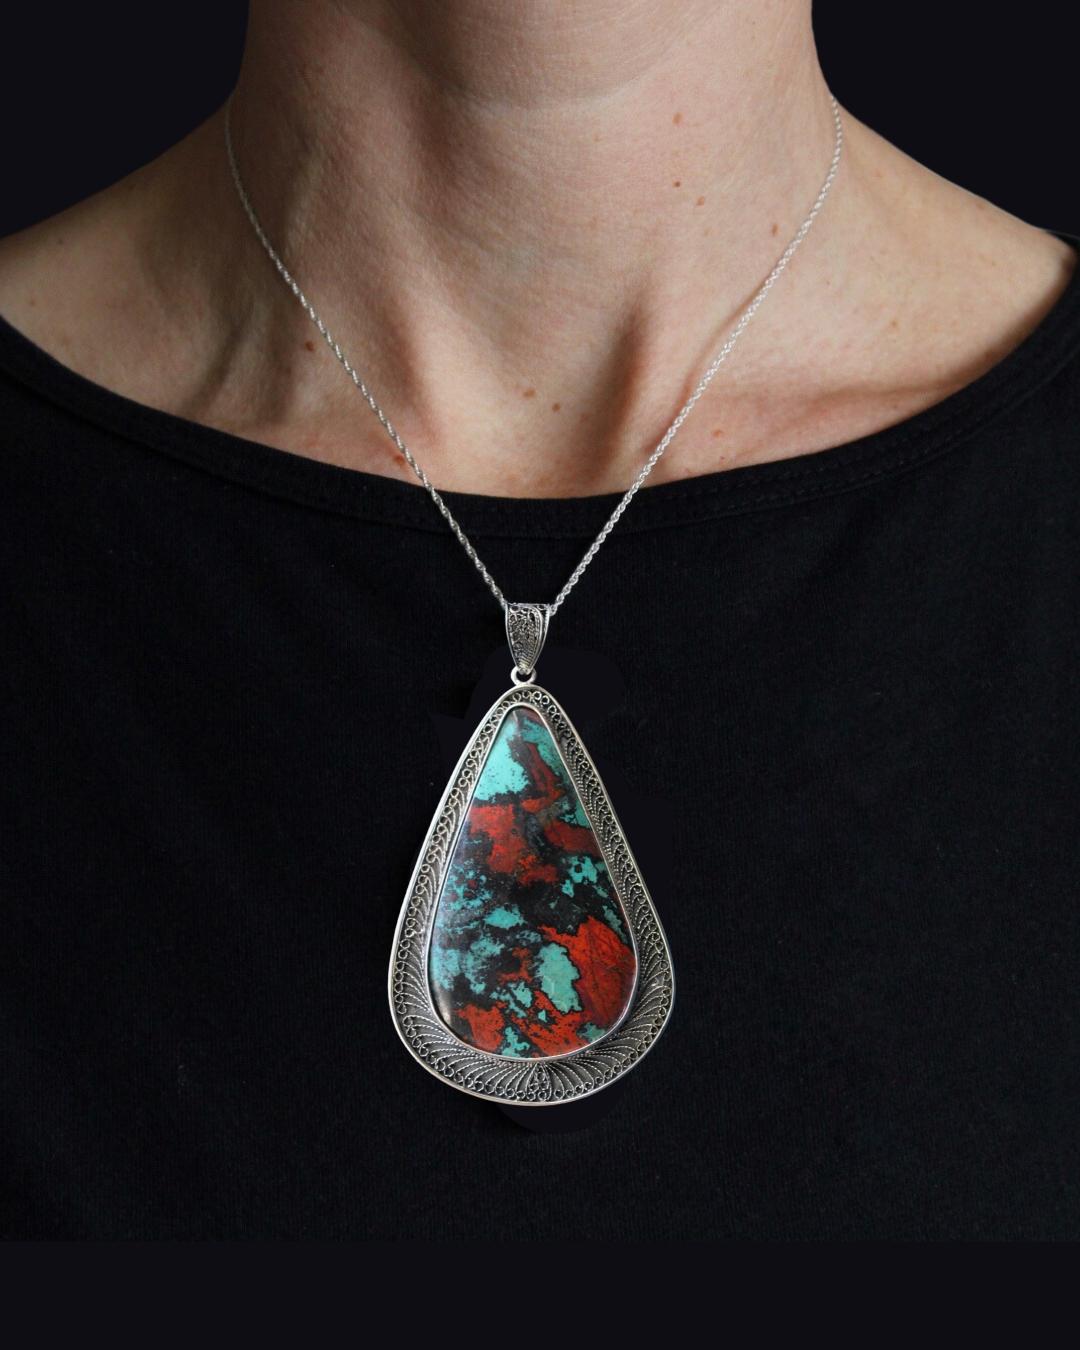 This pendant features a dramatic Sonoran Sunset cabochon. Sonoran Sunset (also known as Sonora Sunrise) is from the Milpillas Mine in Sonora, Mexico and is comprised of three different stones; the blue/green comes from Chrysocolla, the red from